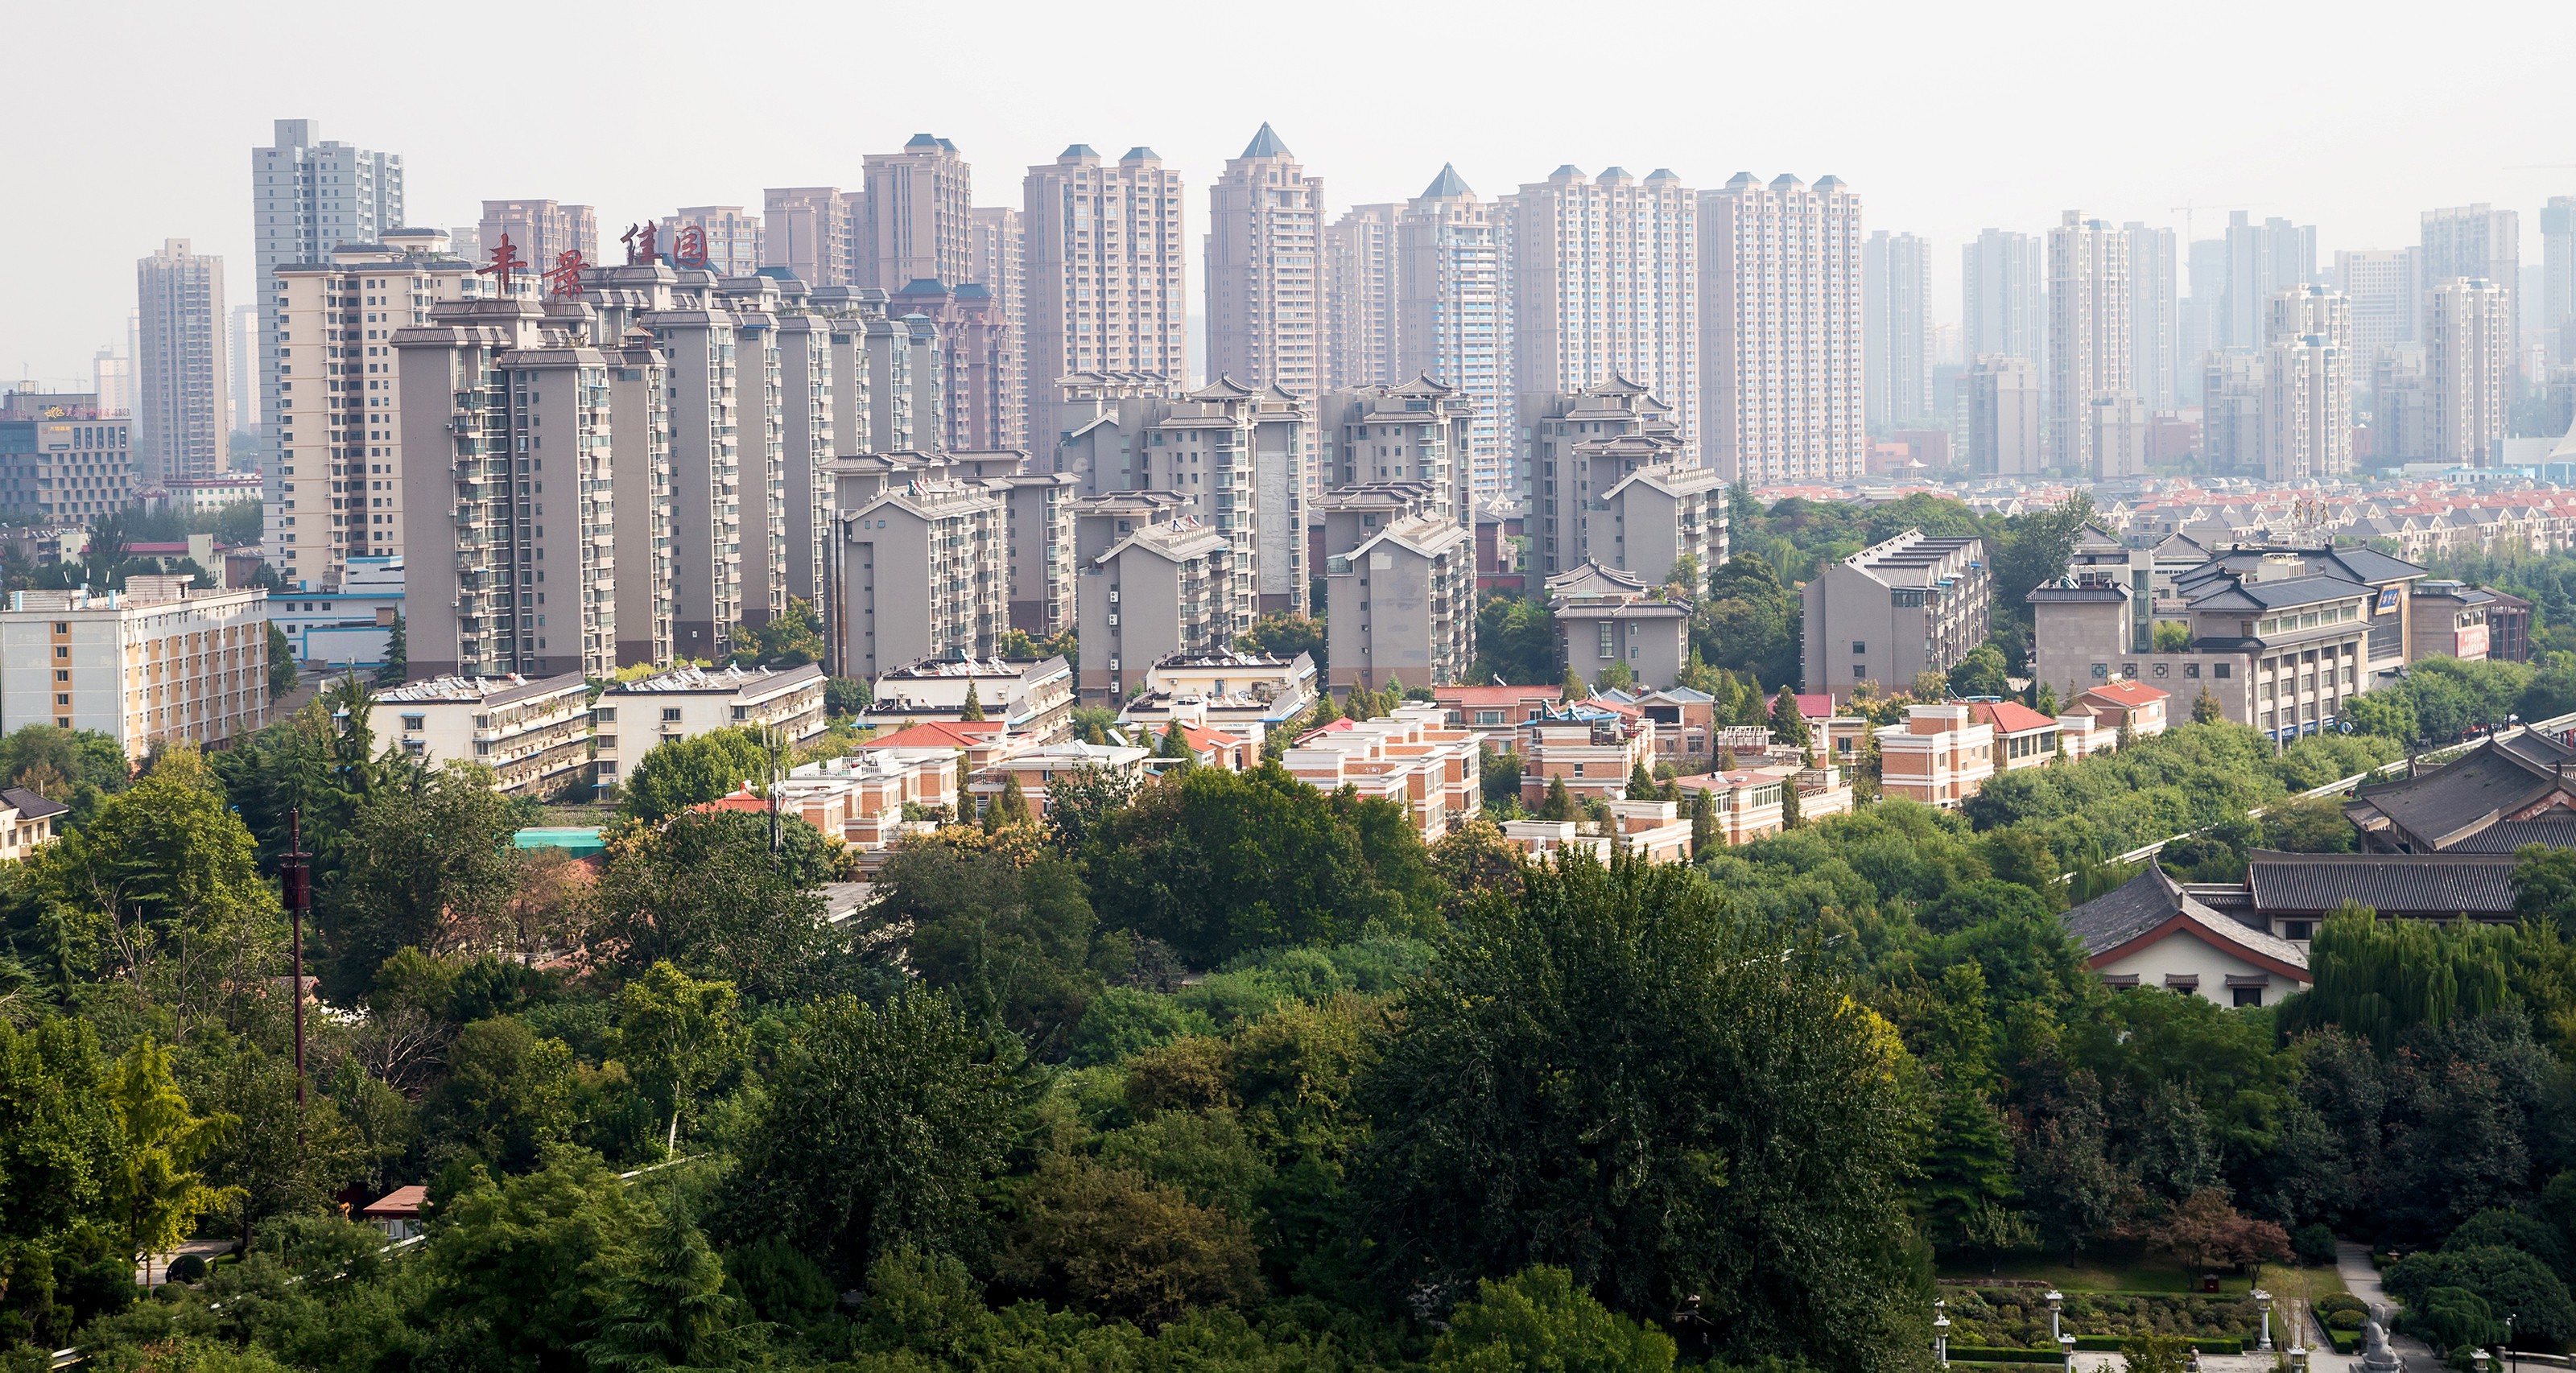 Property prices in Xian, the capital of Shaanxi province, have risen more than 24.4 per cent in the past 12 months. Photo: Shutterstock